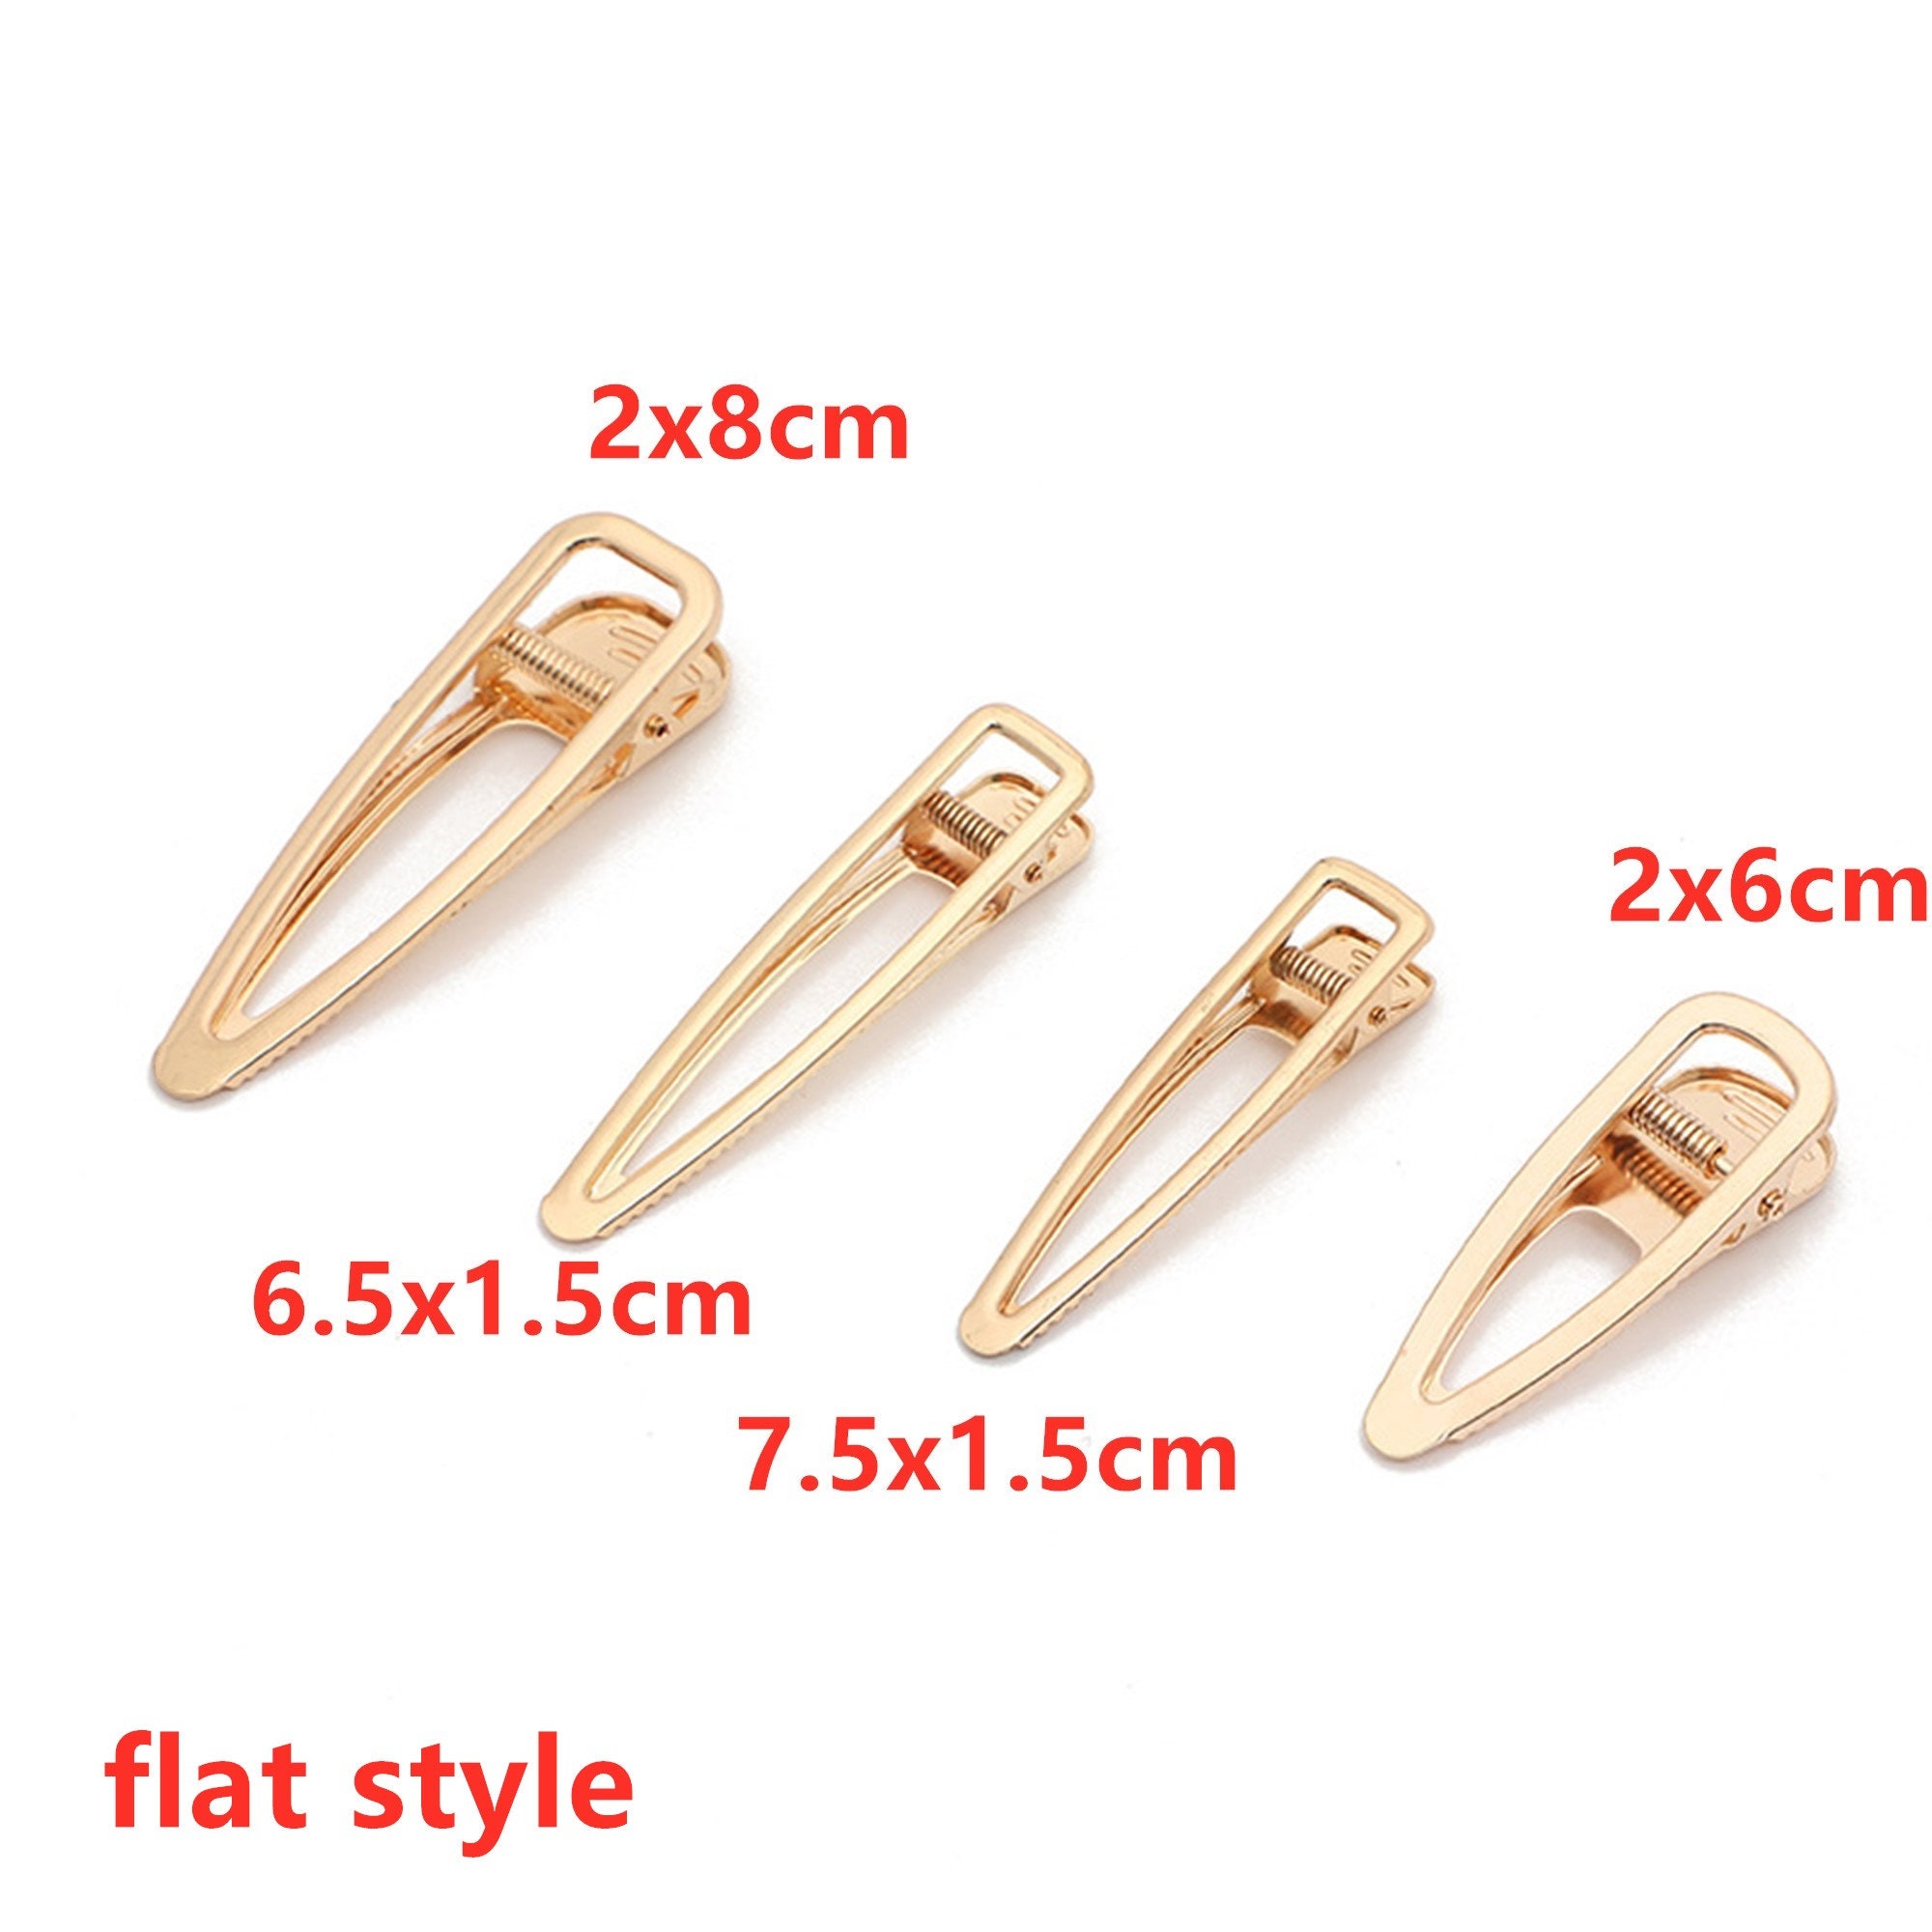 1card/10pcs Medium-sized Water Drop Shaped & Oil Drop Design & Metallic  Material Hair Clips For Women, Suitable For Daily Use